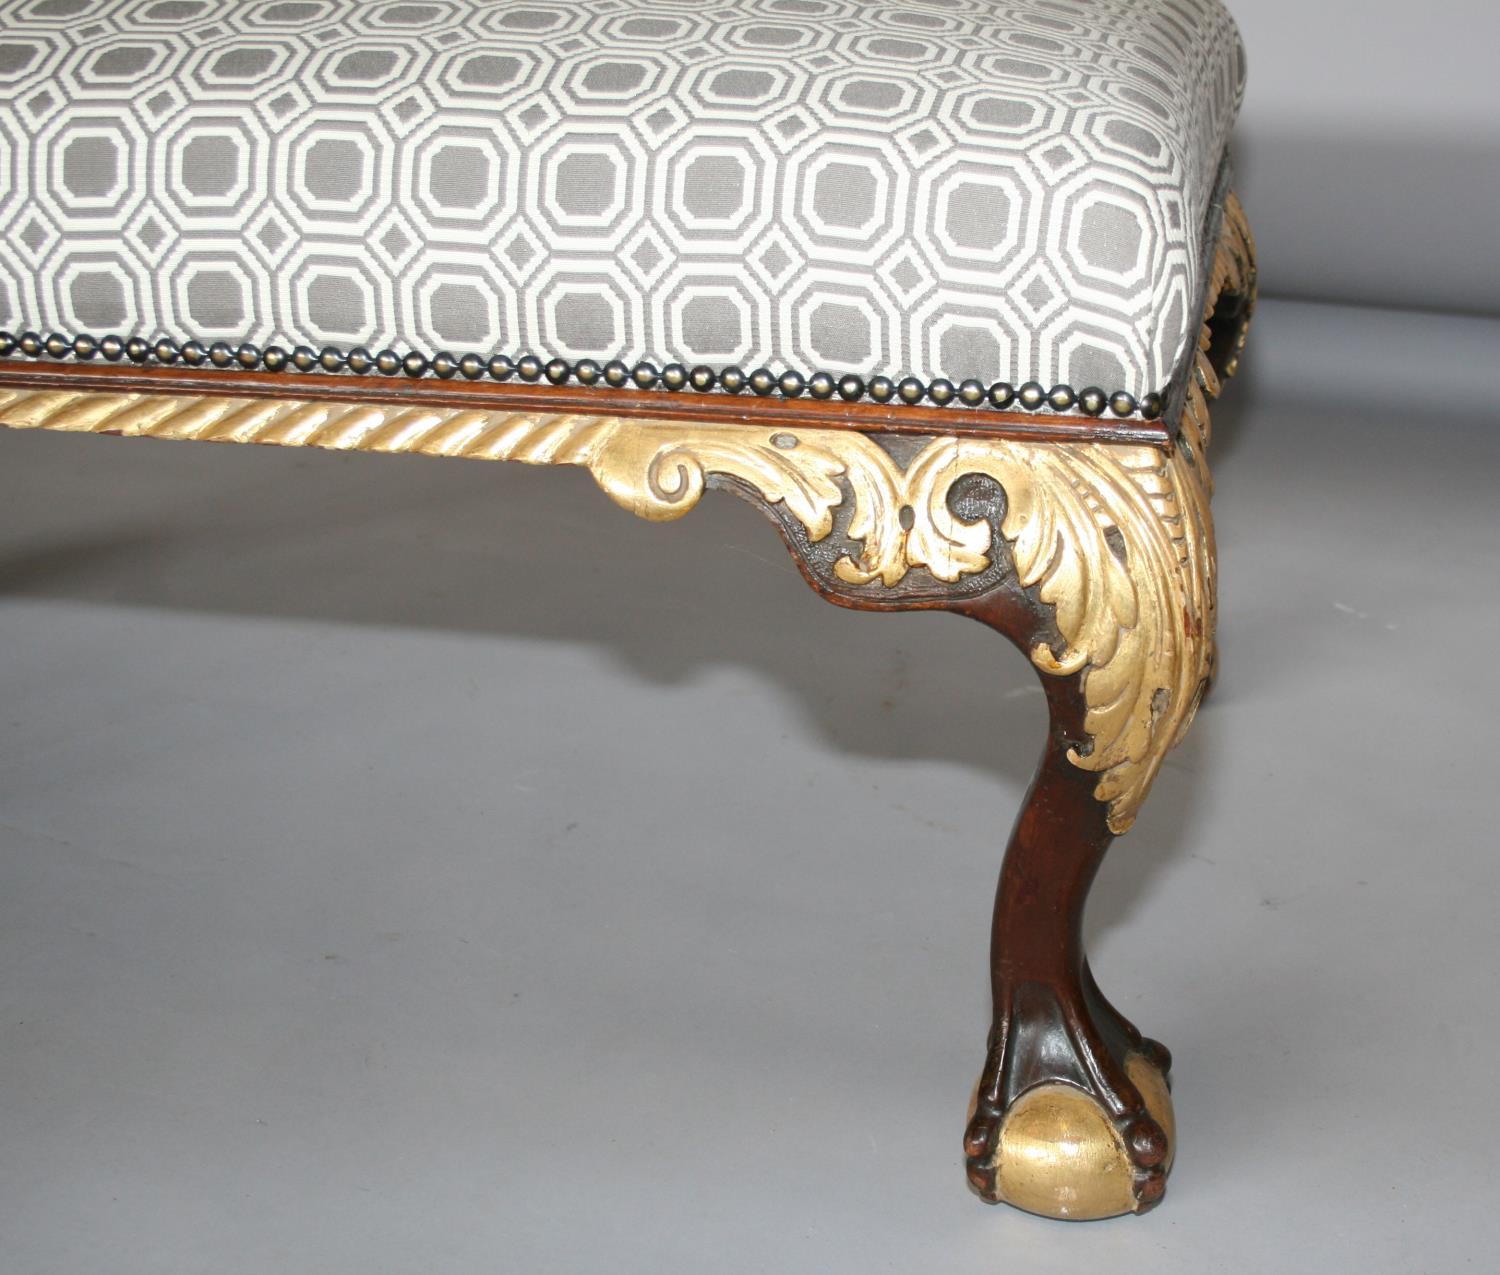 Decorative mahogany and gilt centre stool, upholstered with brass stud embellishment standing on - Image 2 of 3